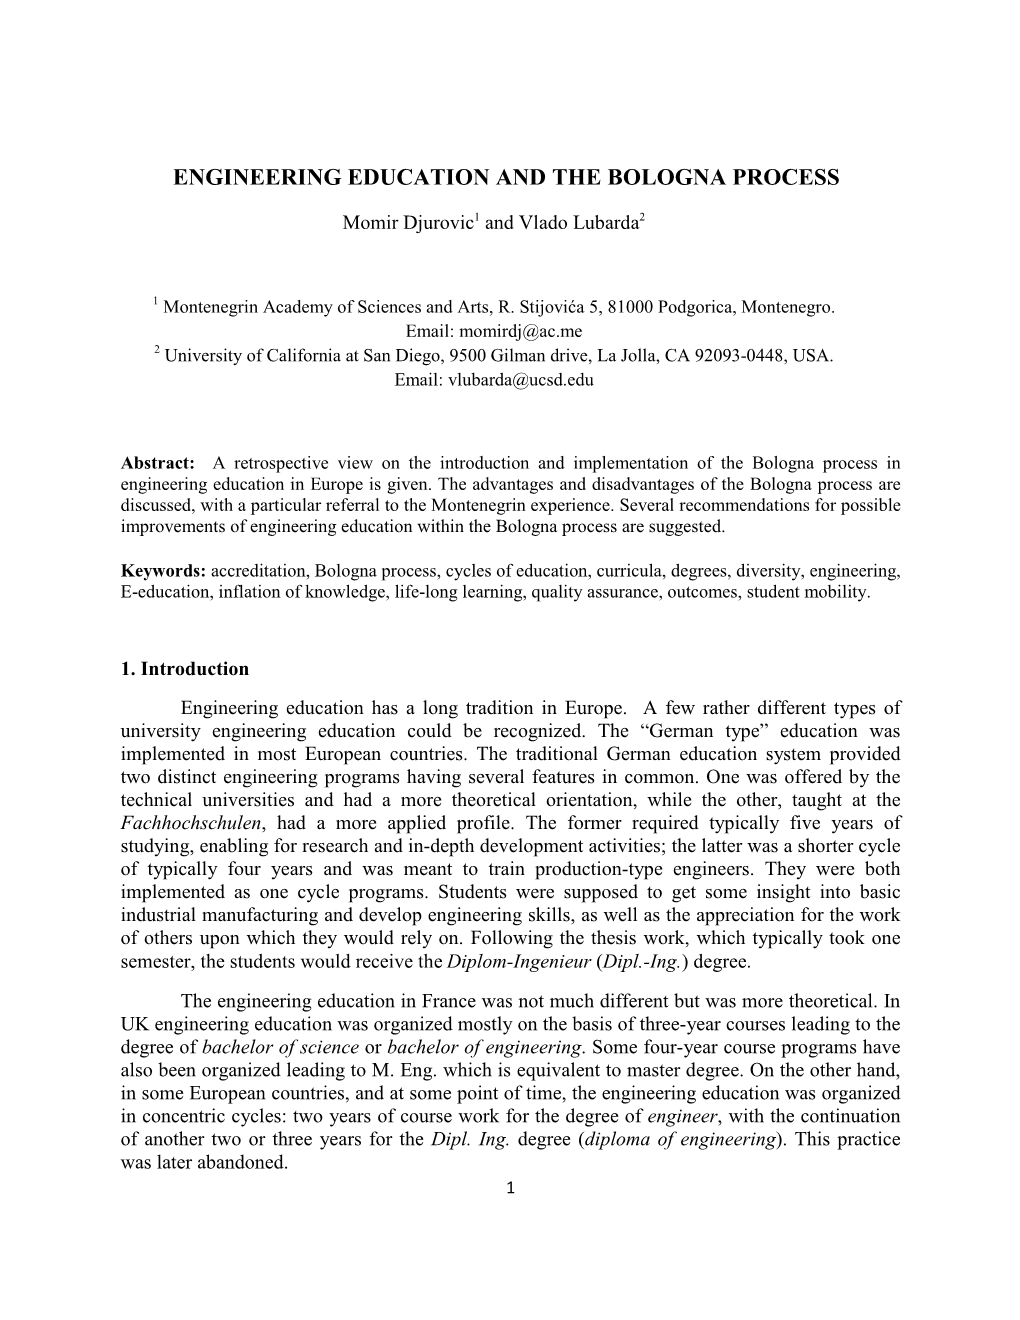 Engineering Education and the Bologna Process